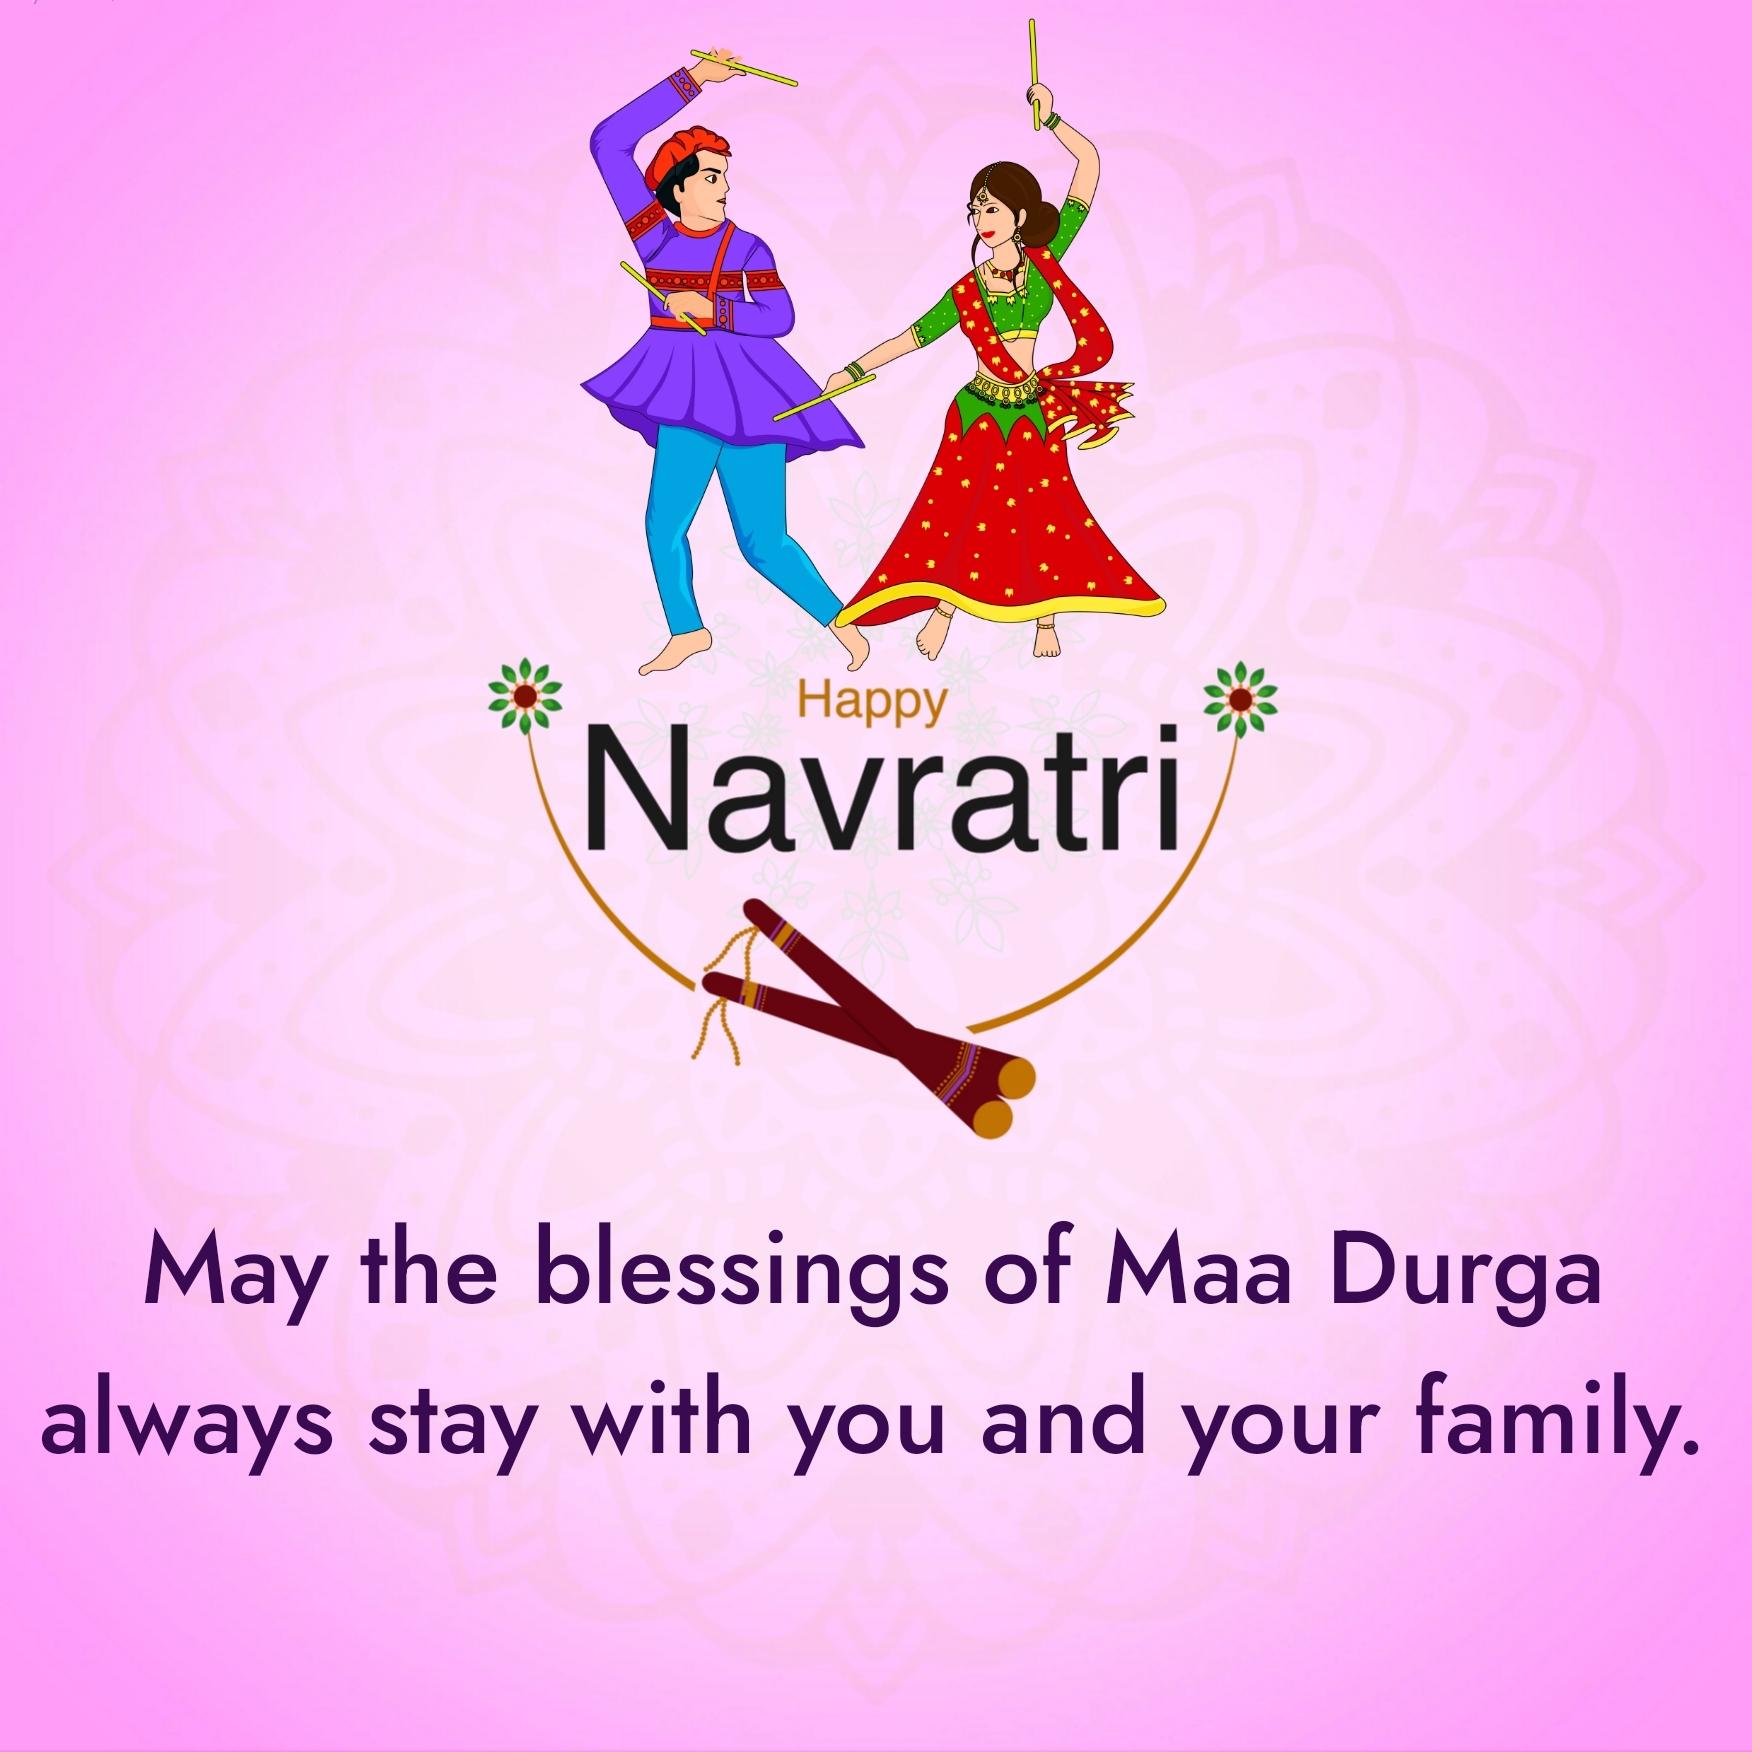 May the blessings of Maa Durga always stay with you